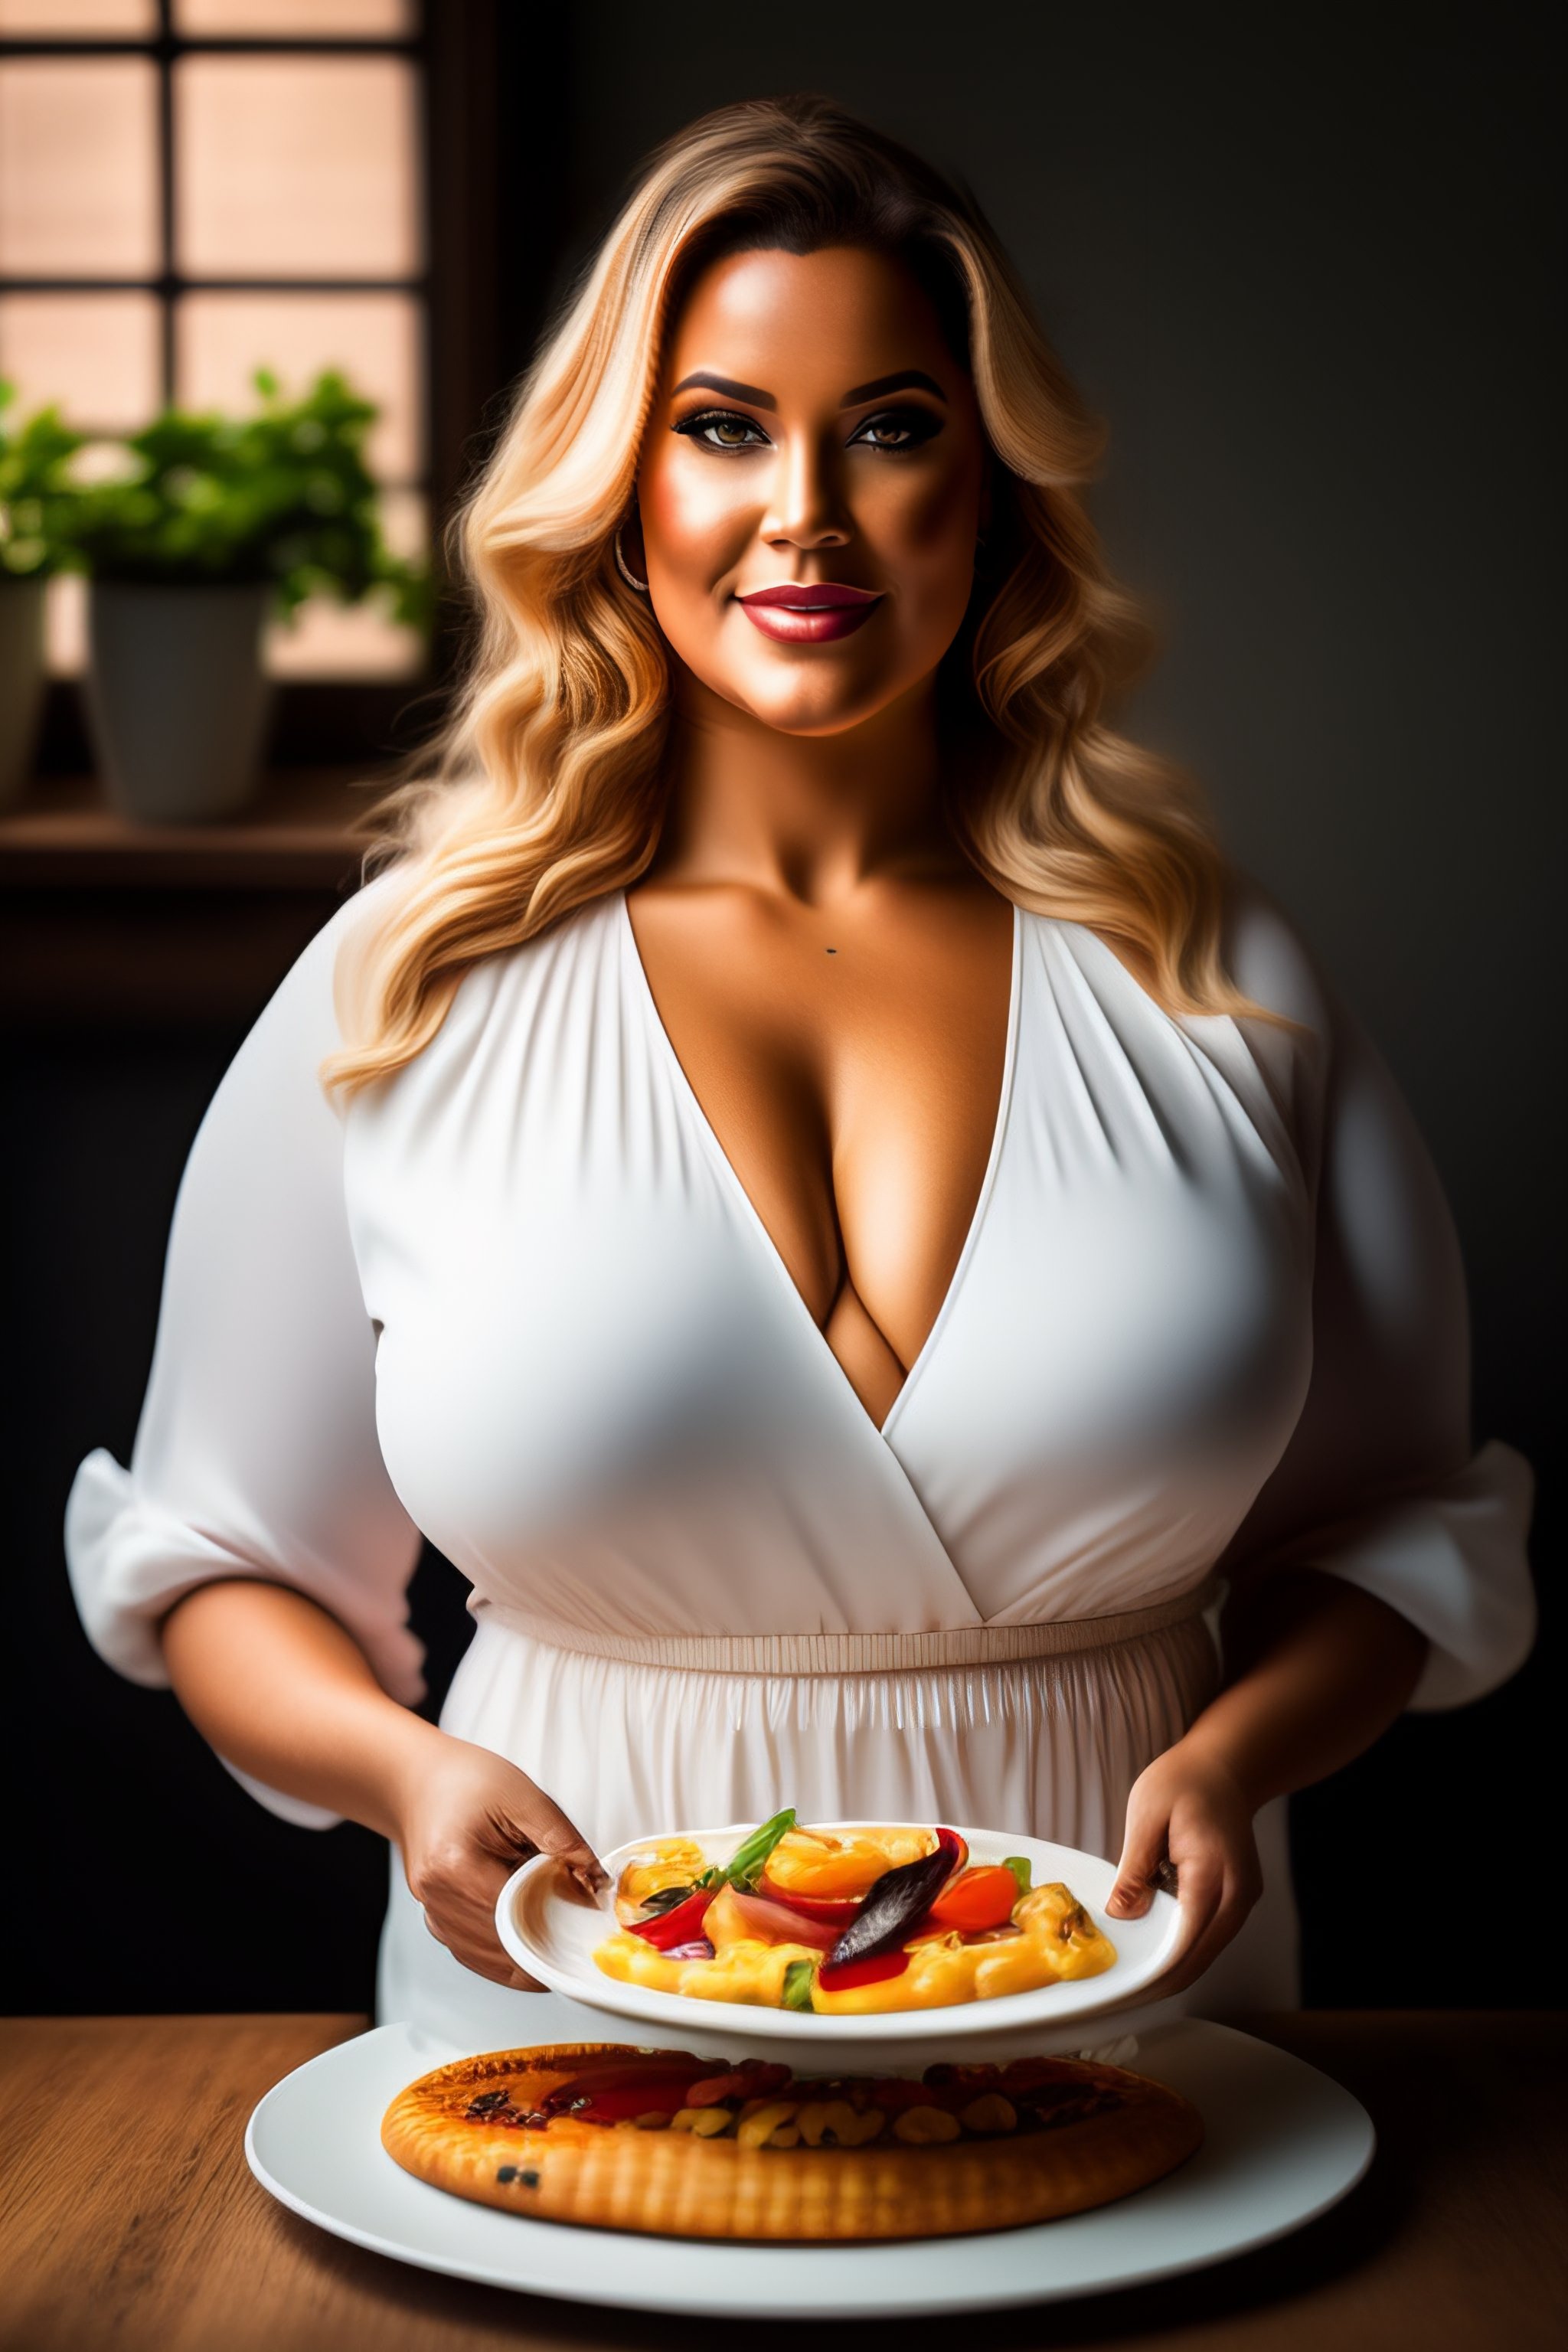 Lexica - Full-figured shapely Swedish woman wearing a tight and revealing  shirt, serving food